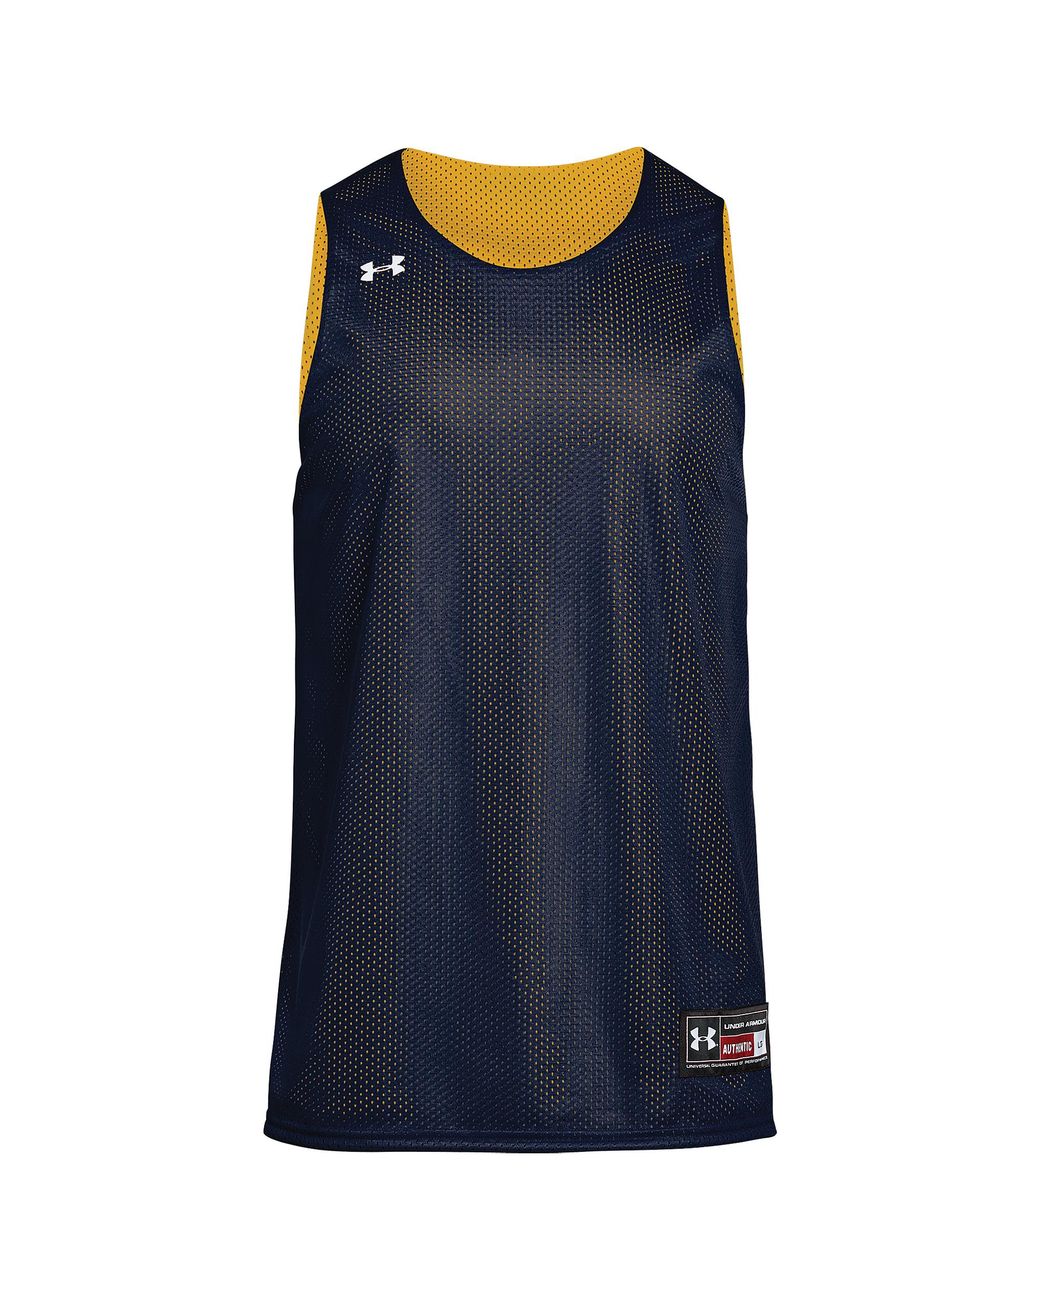 Under Armour Team Triple Double Jersey in Blue for Men - Lyst